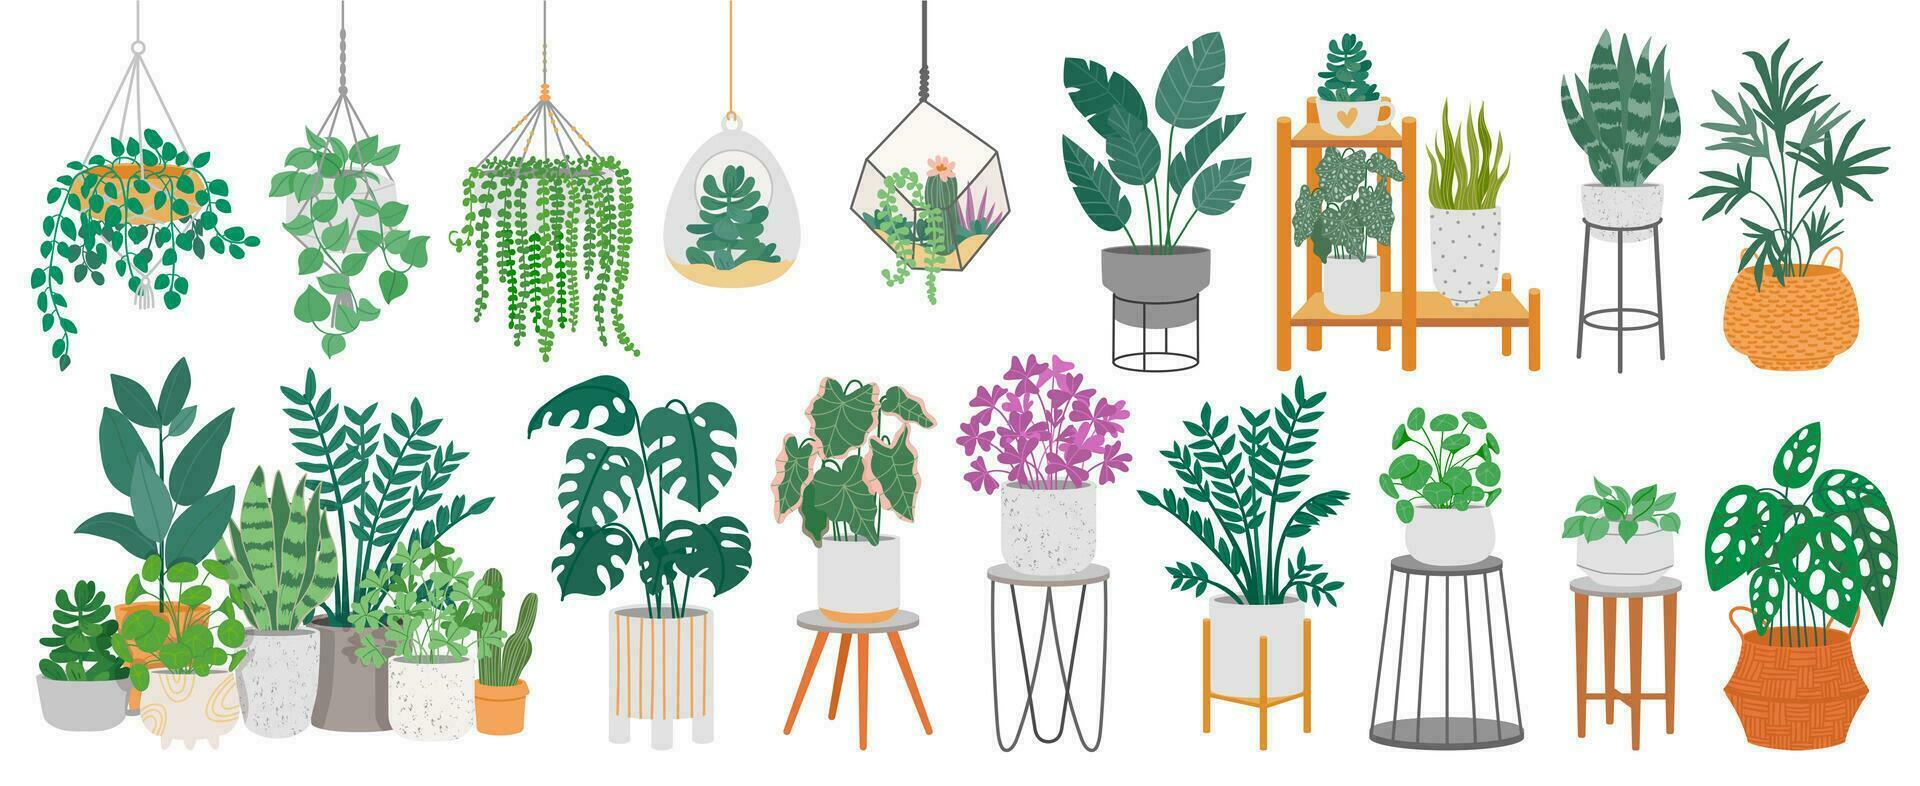 Indoor plants with decorative greenhouse elements. Green plants standing in pots on shelves, hanging in planter, macrame at cozy interior isolated on white background. Vector set